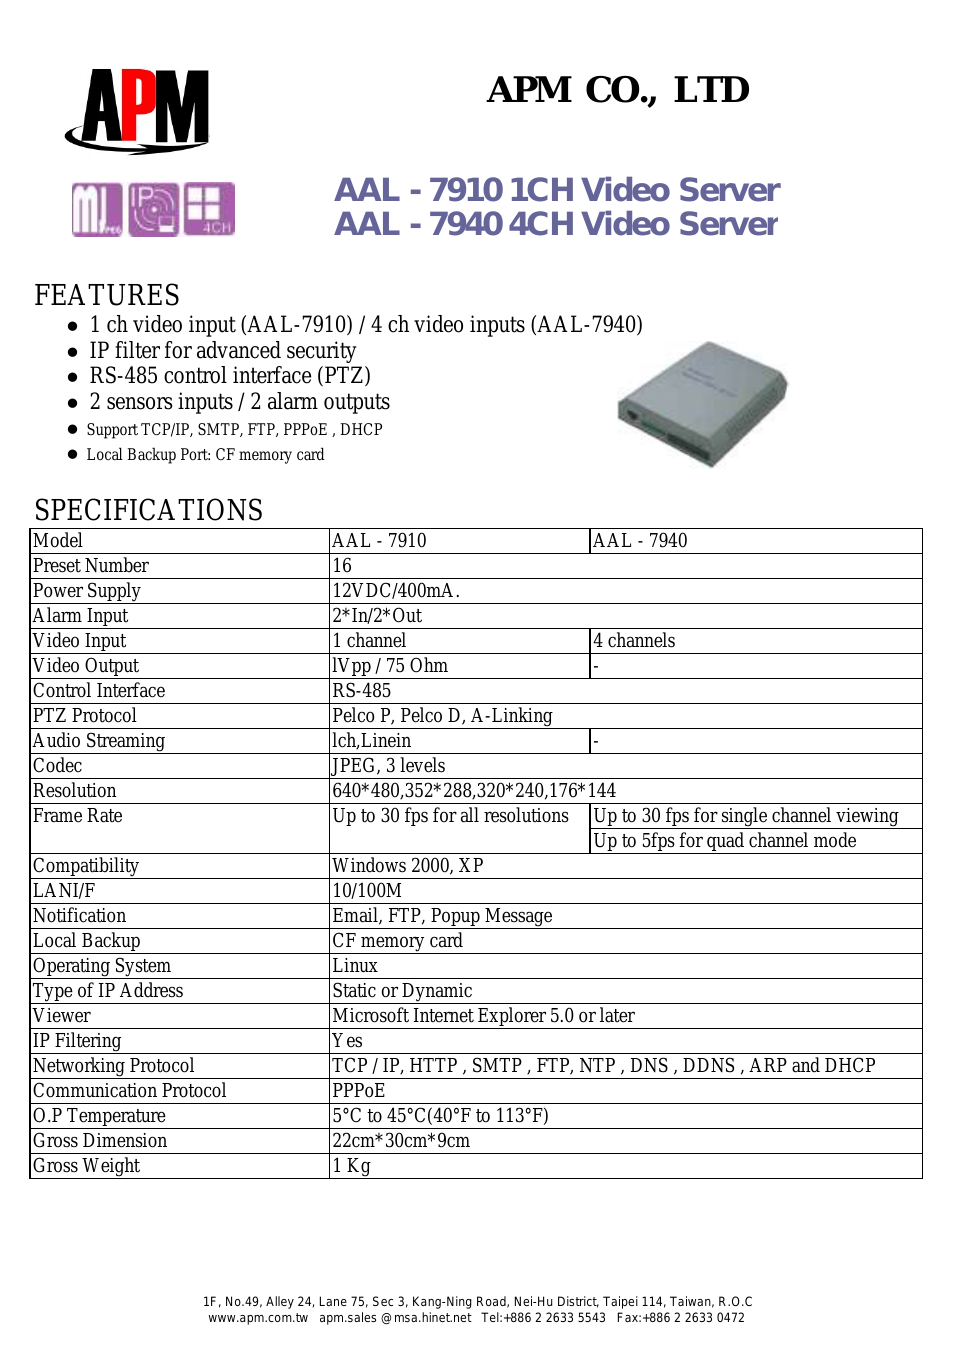 Video Server AAL - 7940 4CH